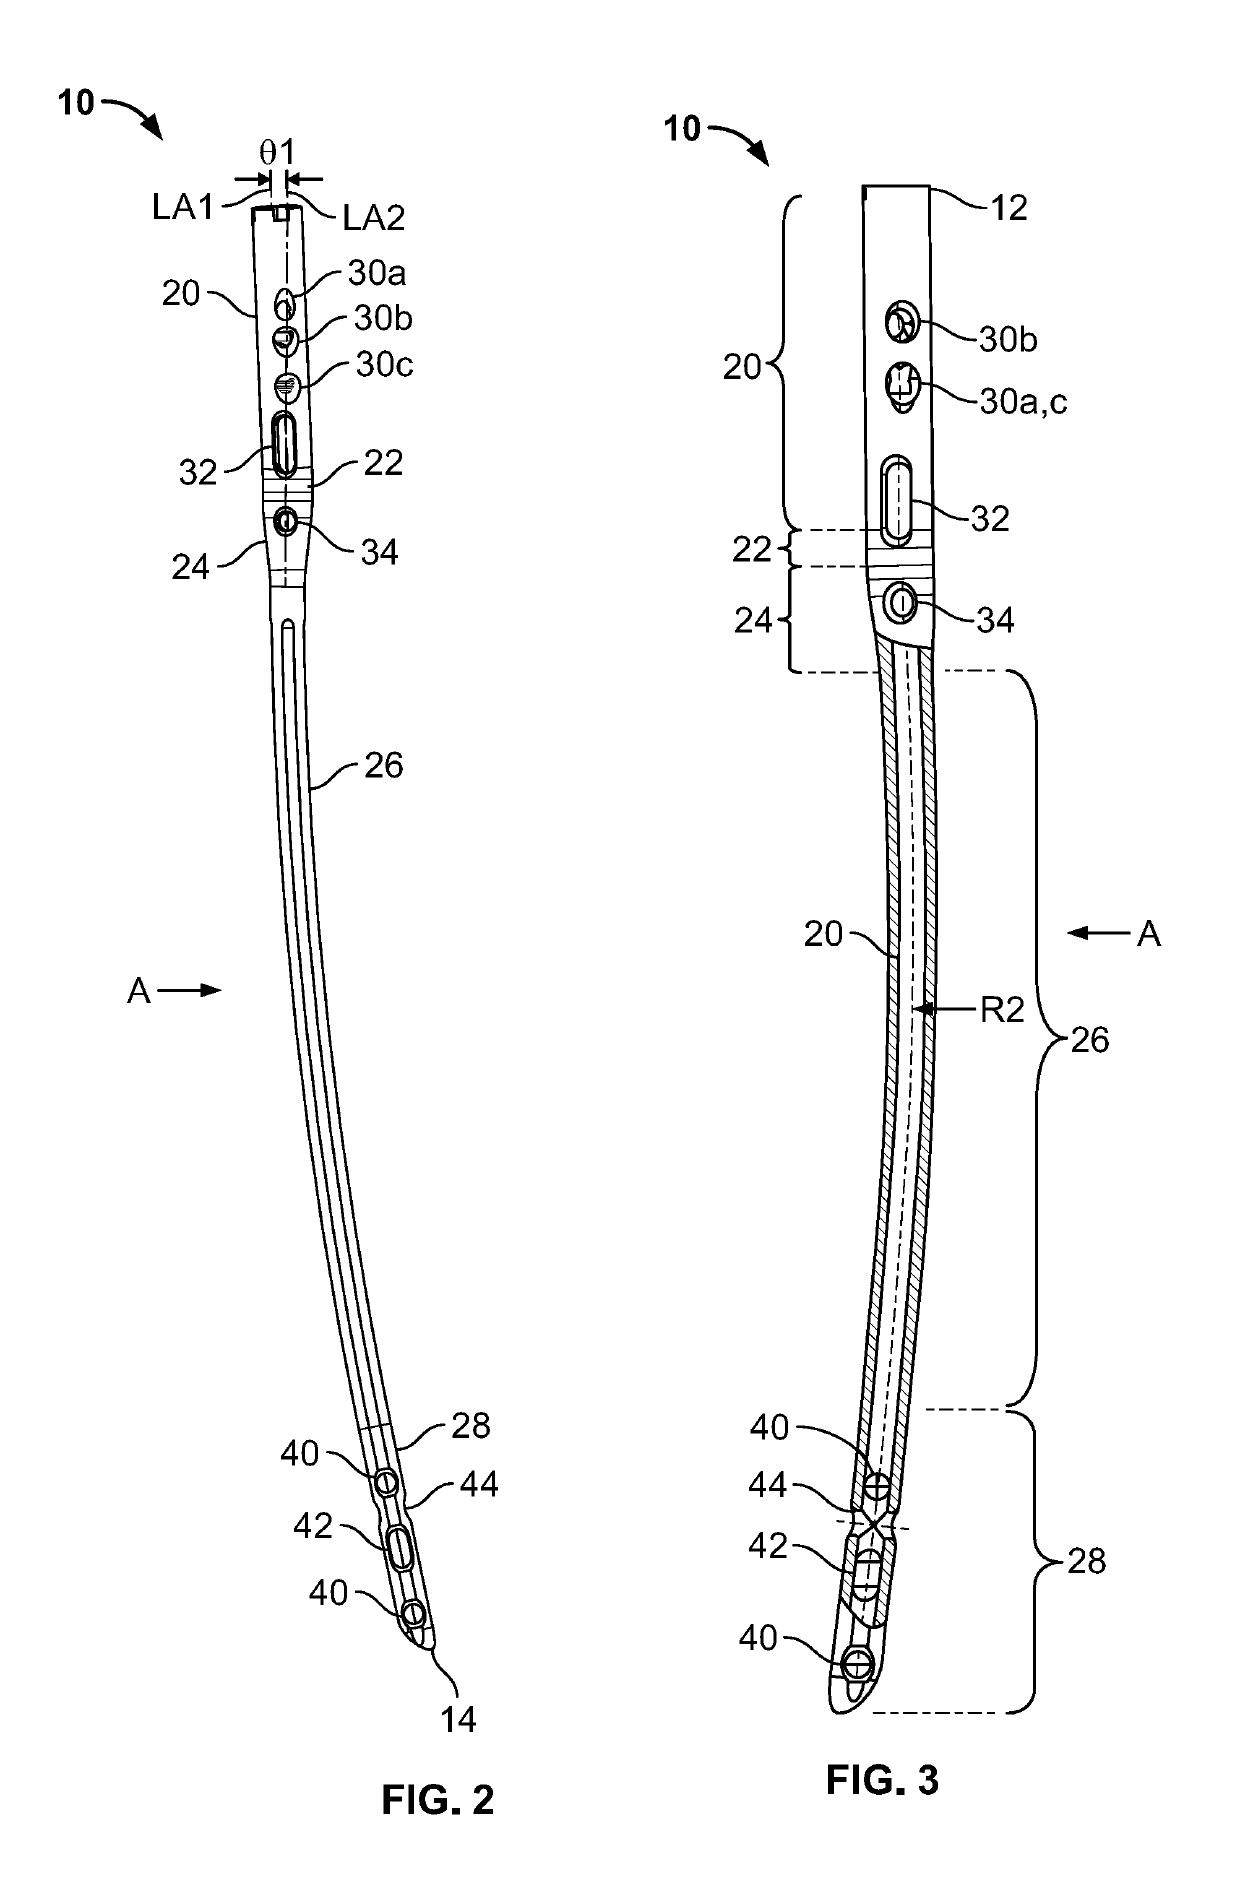 Femoral Nail With Enhanced Bone Conforming Geometry